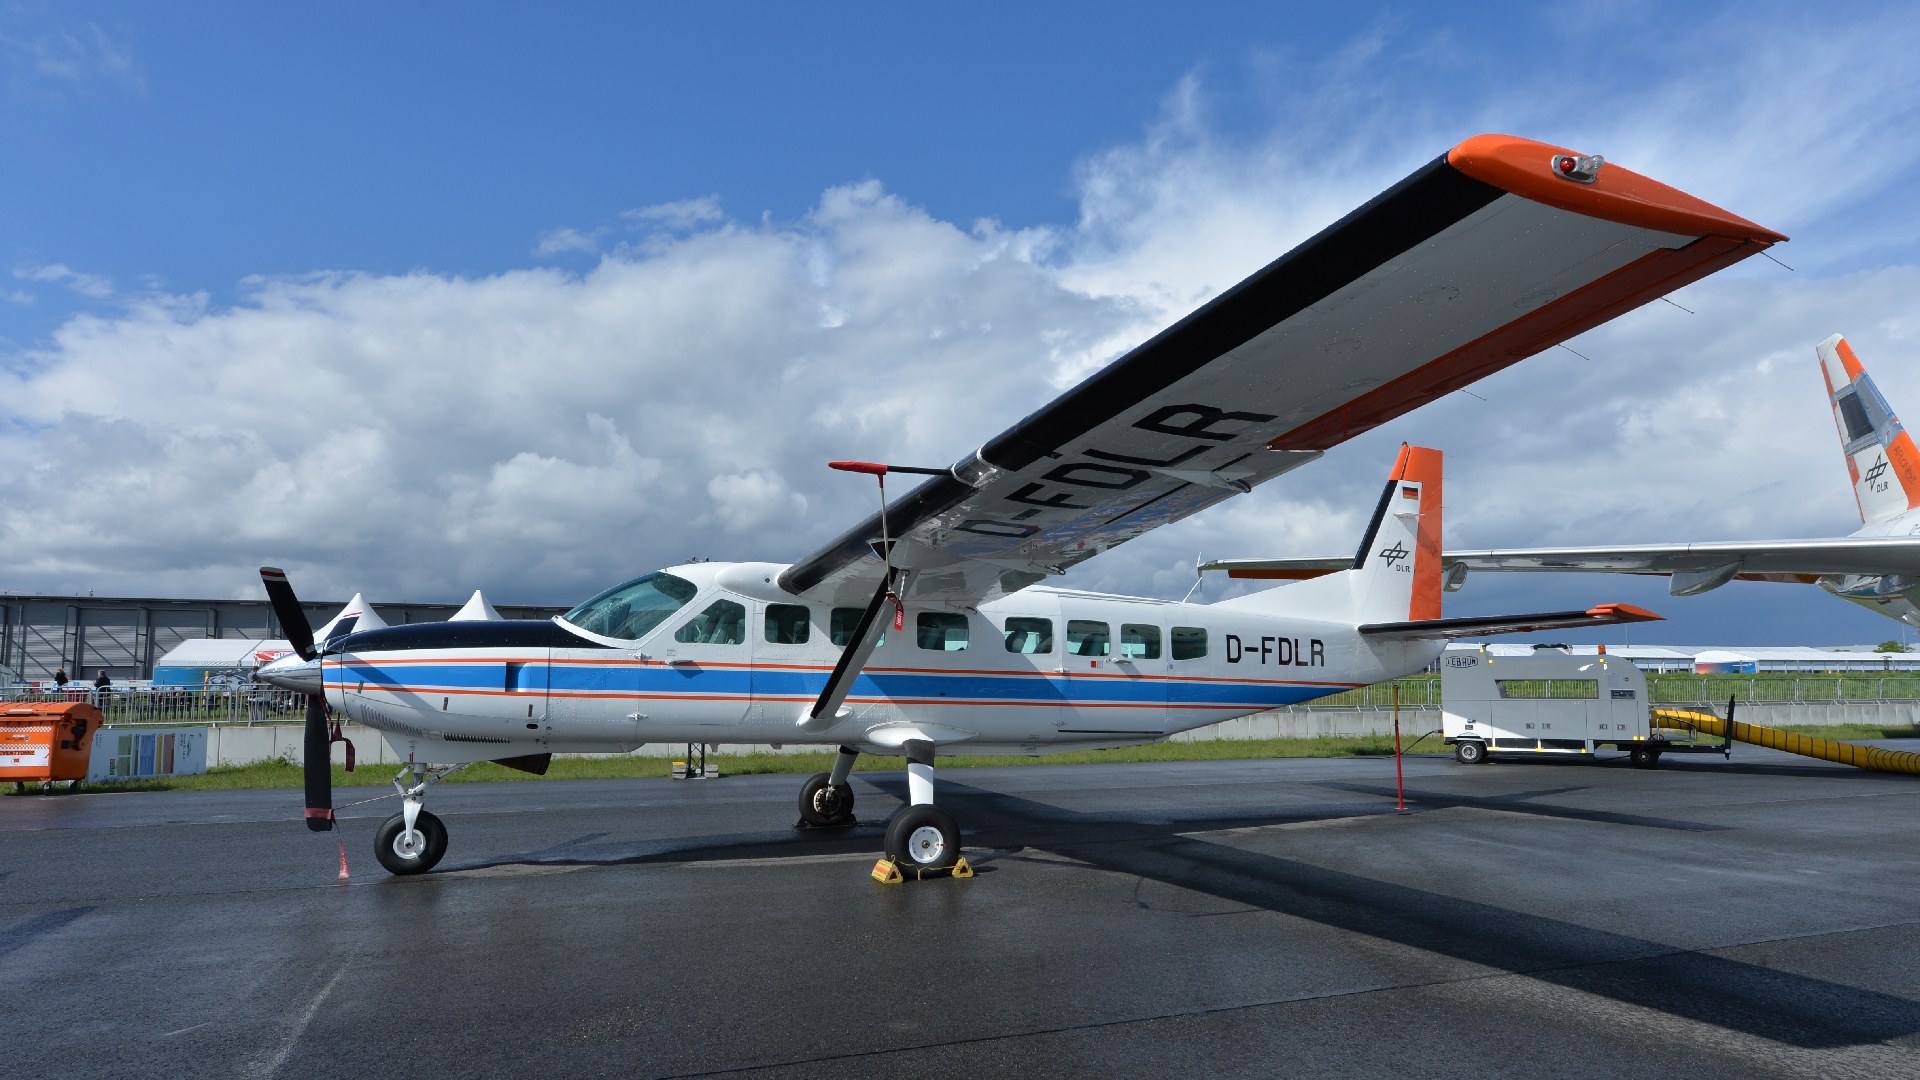 The DLR Cessna 208 research plane